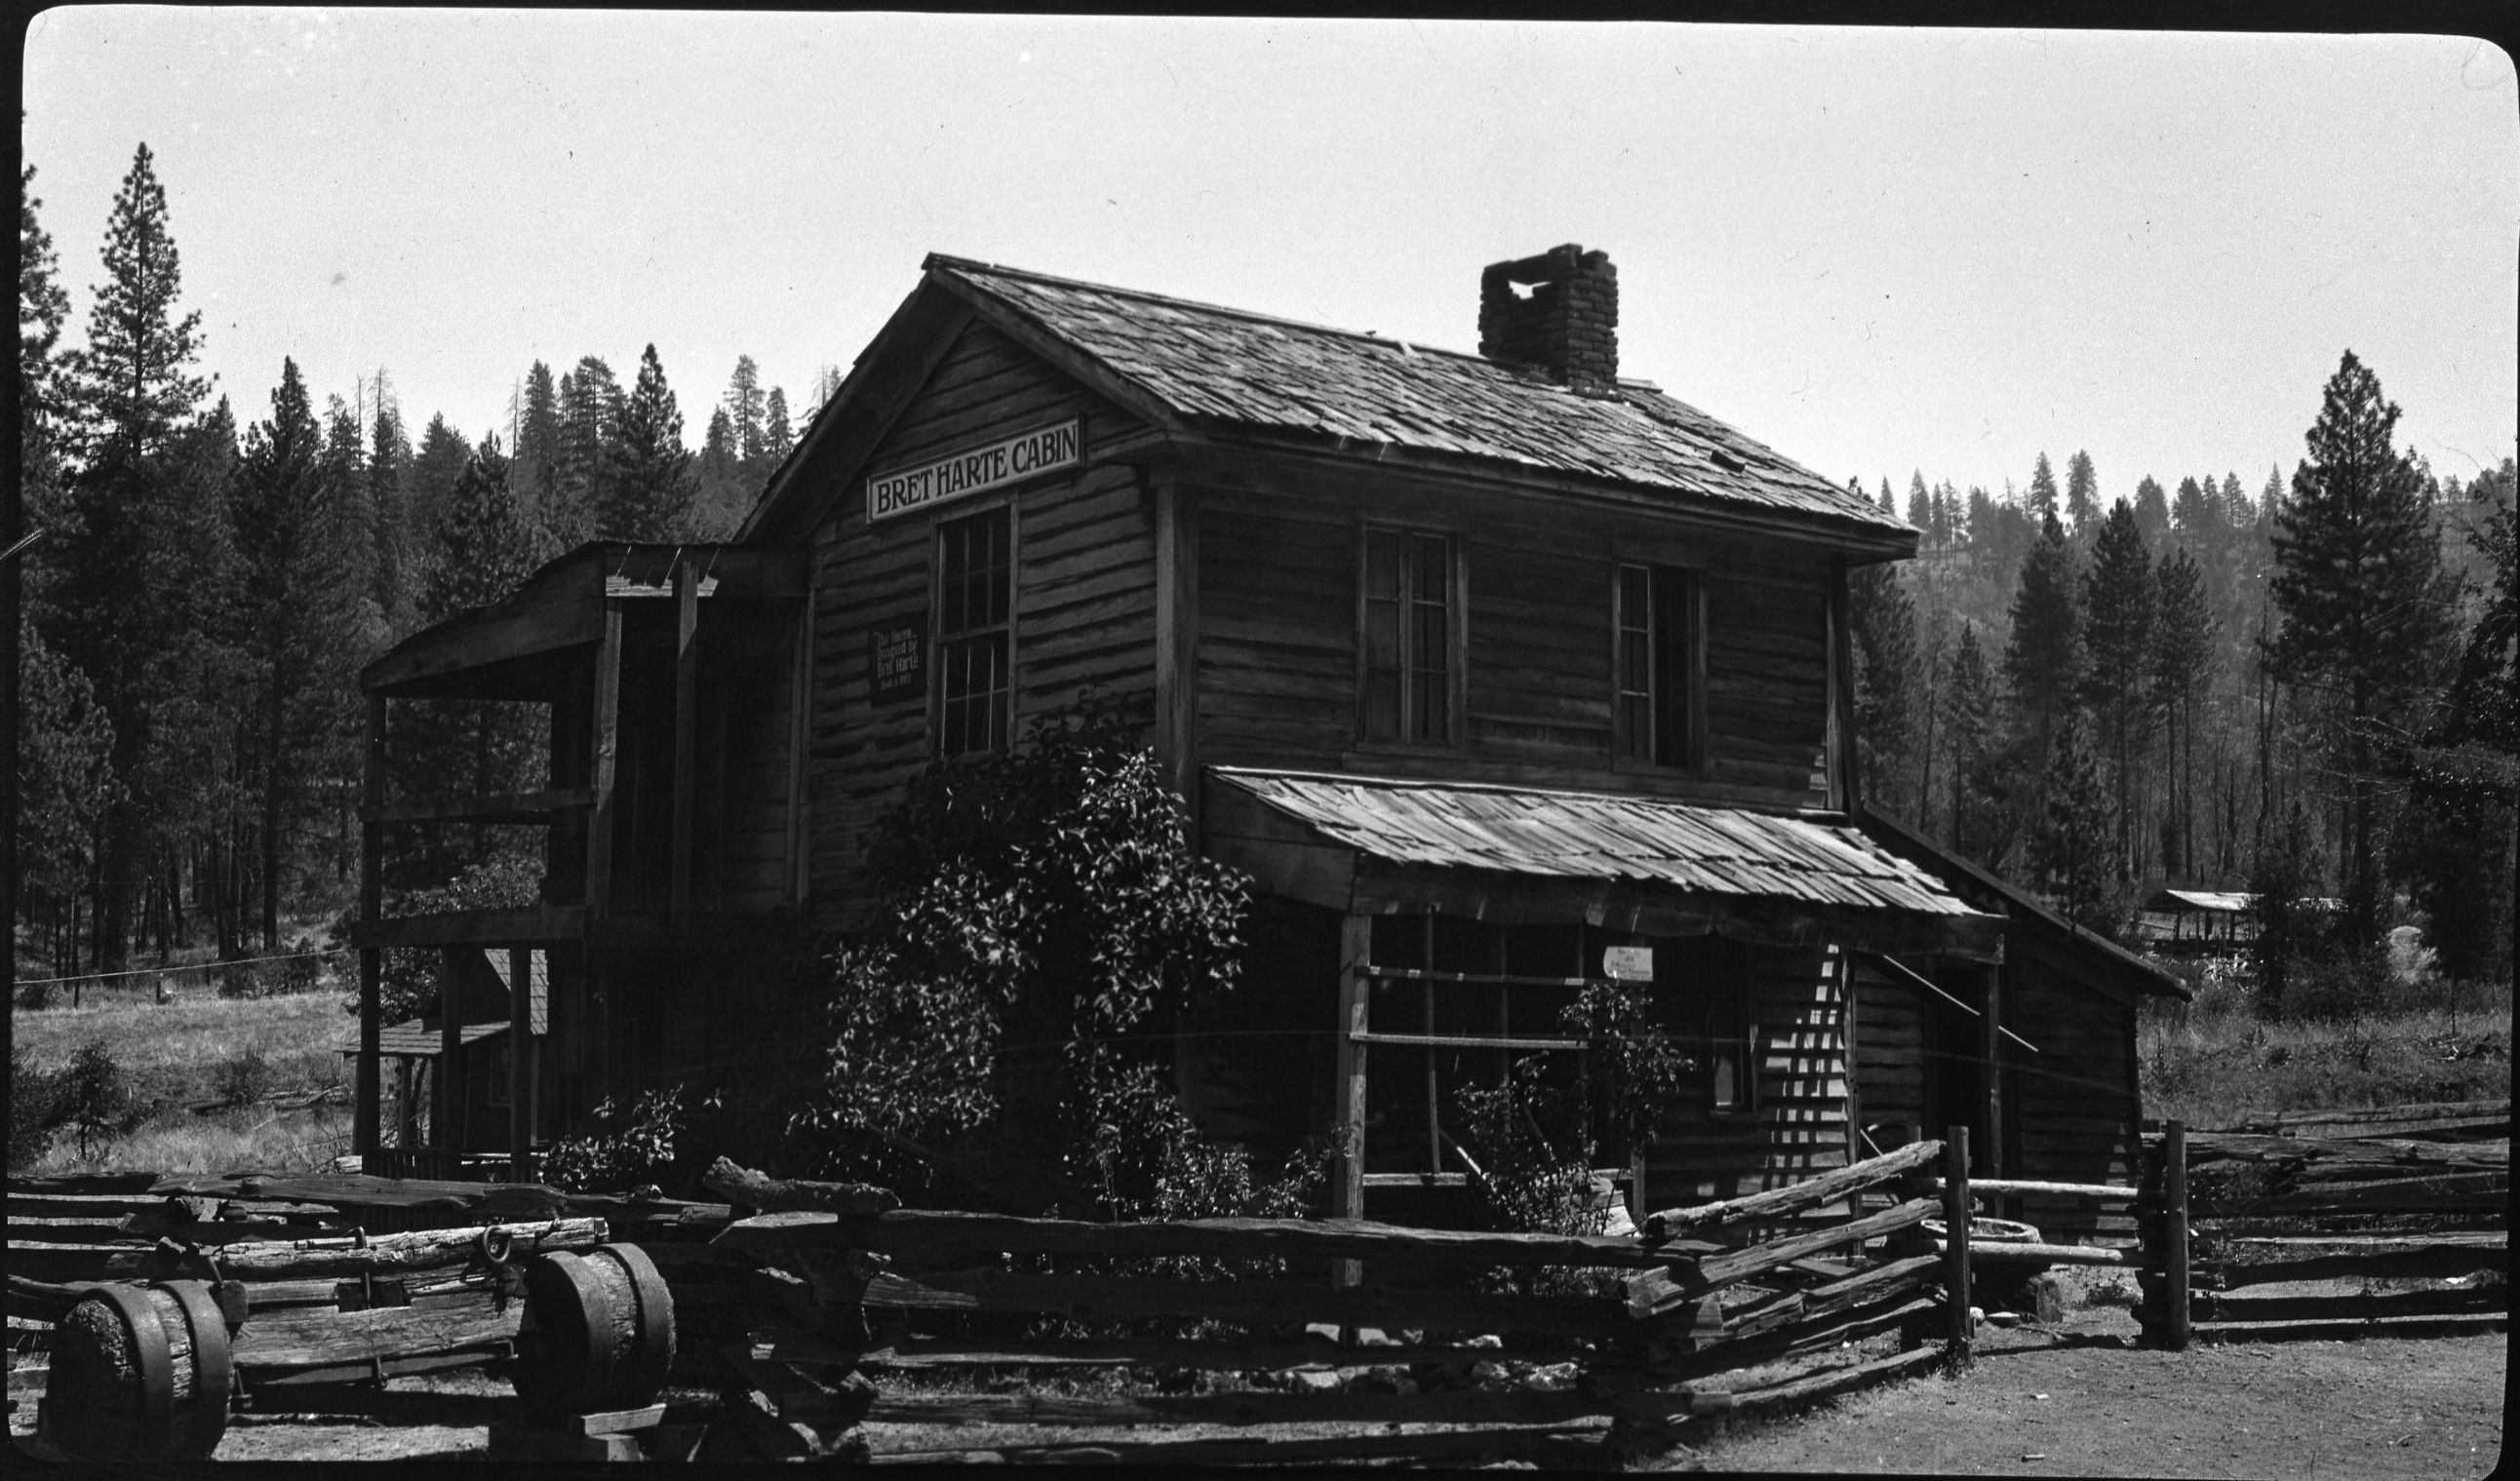 Chaffee and Chamberlain's cabin. (Bret Harte based his short sketch on them titled "Tennessee's Partner"." See also "The Big Oak Flat Road" by Irene Paden & Margaret Sclichtmann.